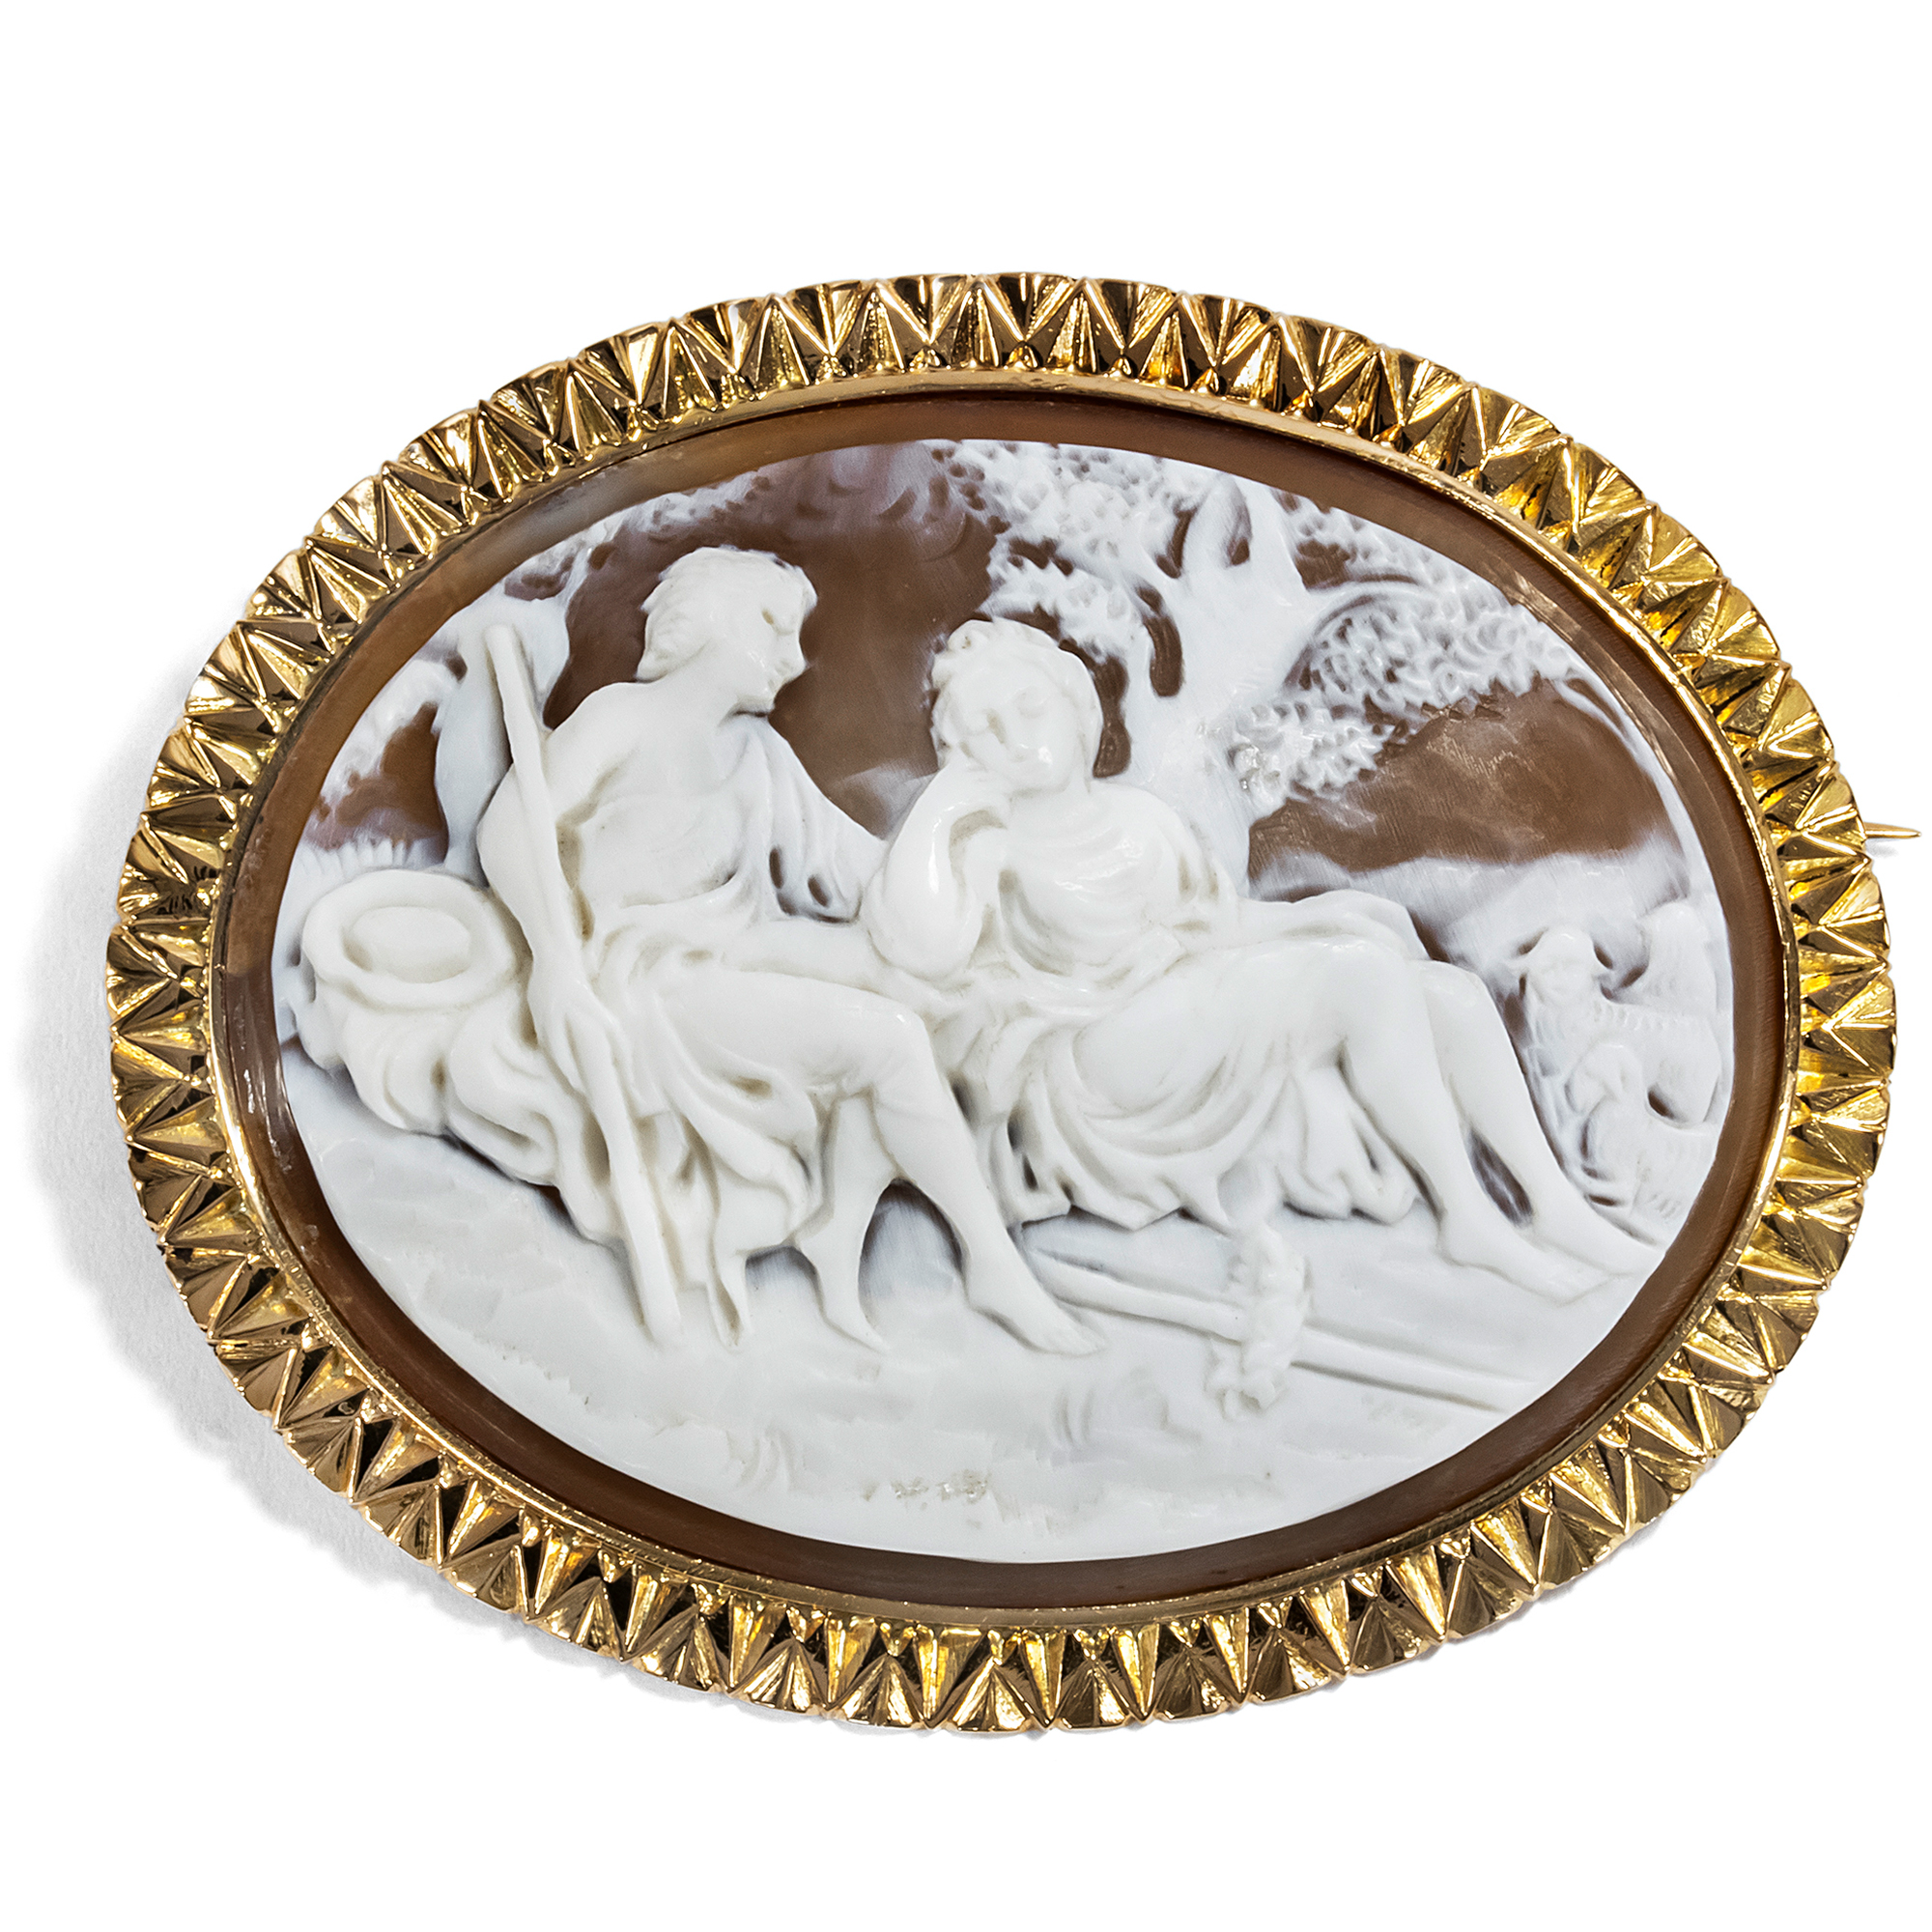 Bucolic shell cameo set in gold as a brooch, circa 1875